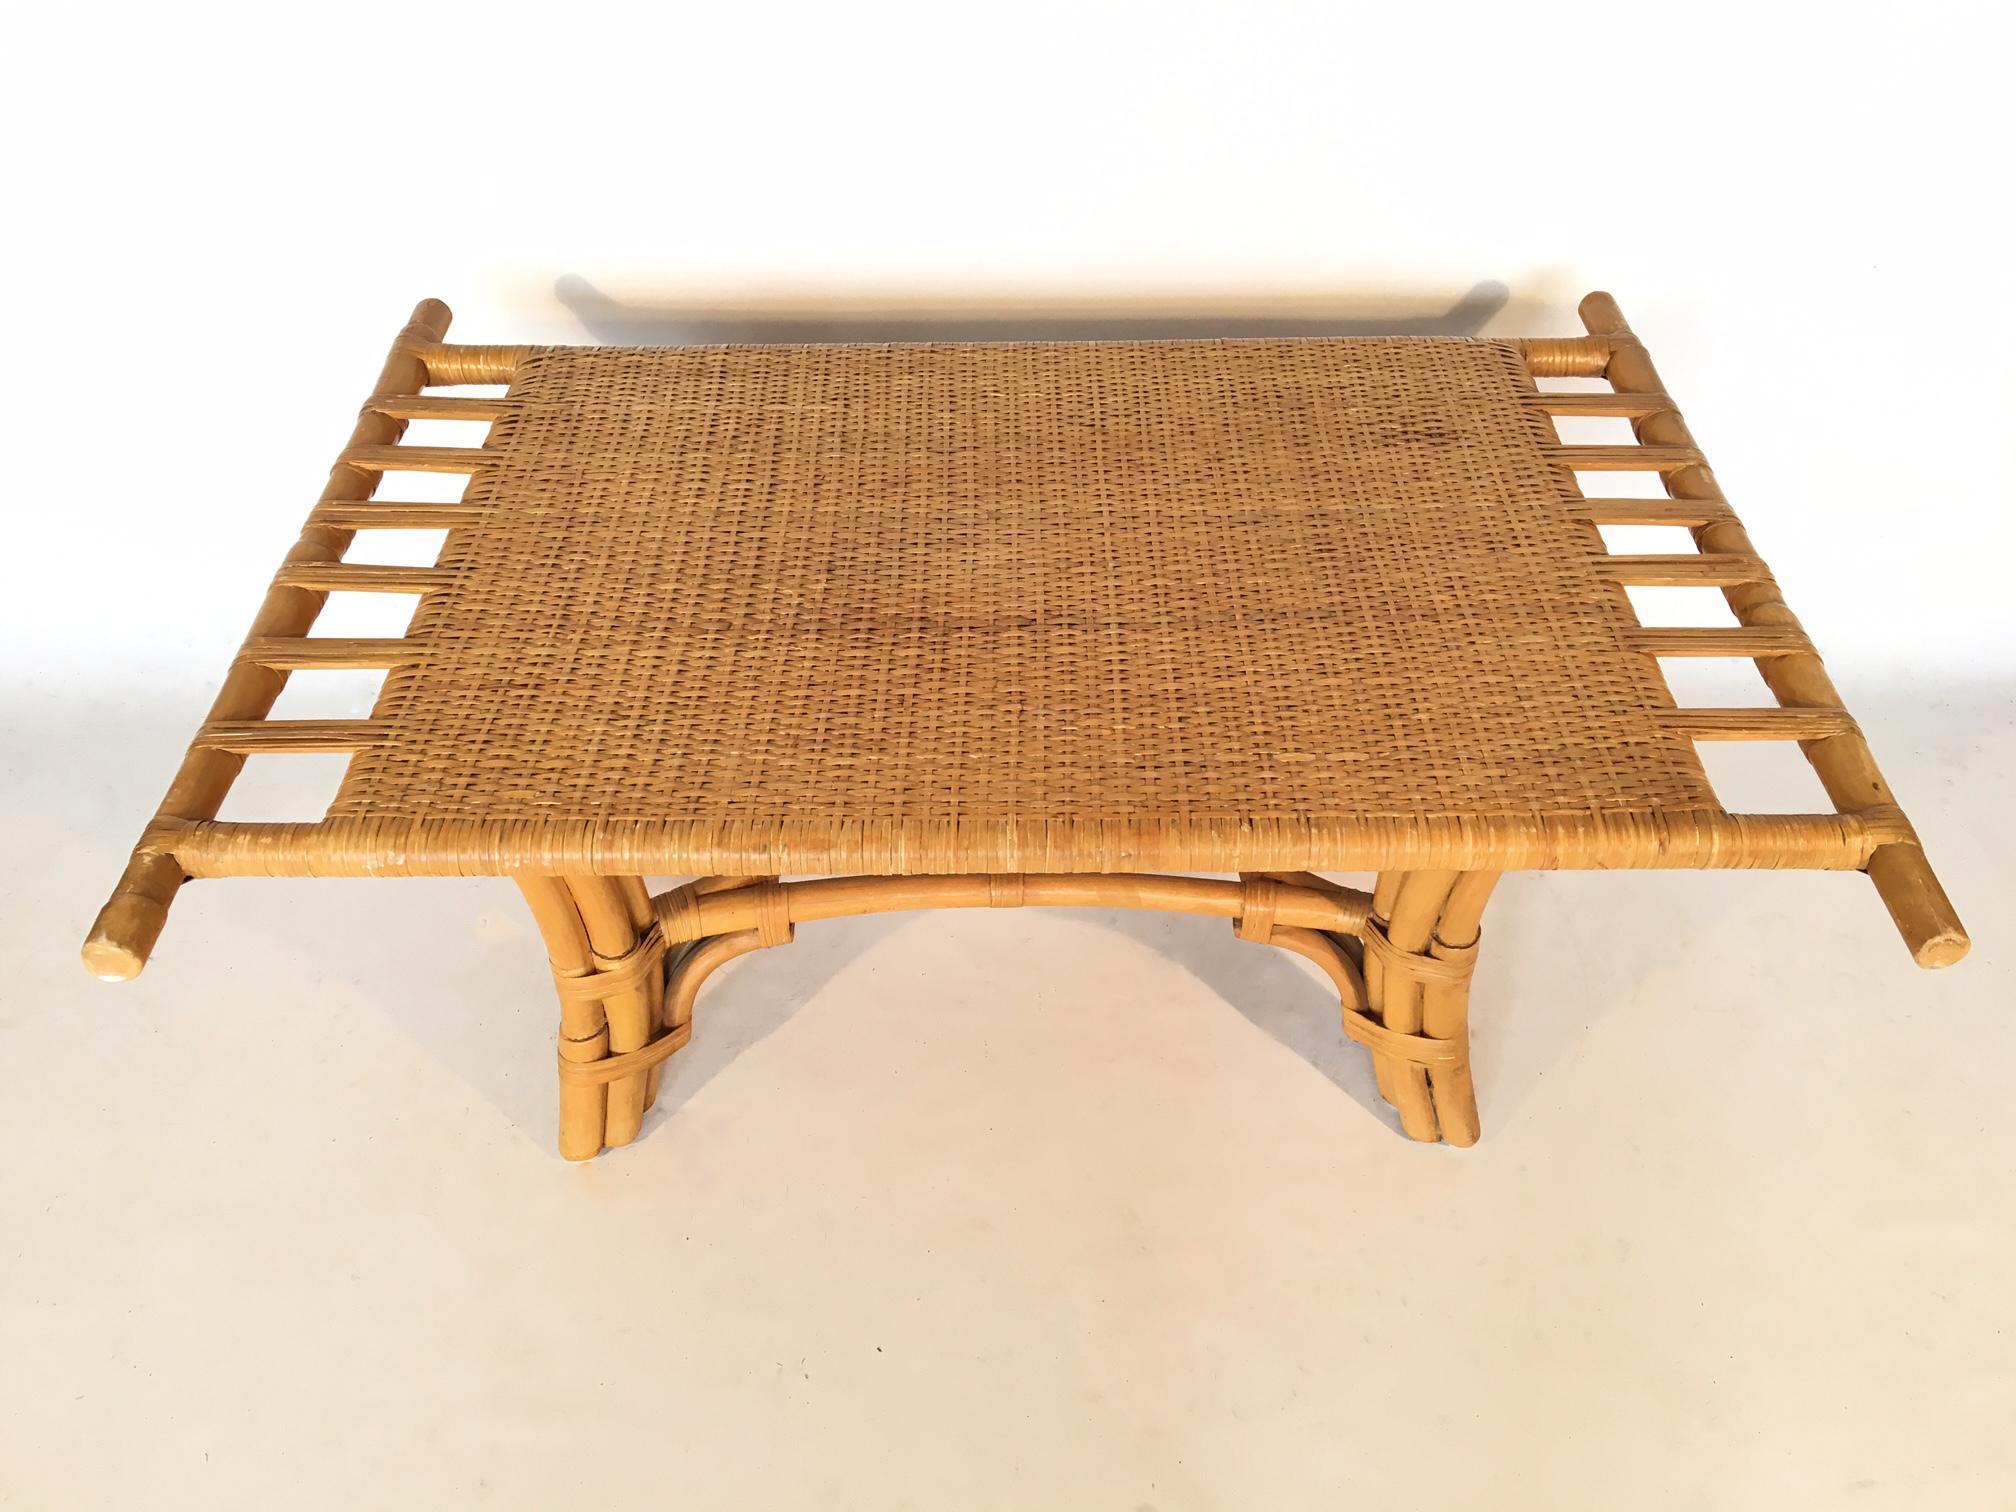 Bamboo coffee table features ornate hand-formed structure and cane woven rattan top and bindings. Excellent vintage condition with minor abrasions consistent with age.